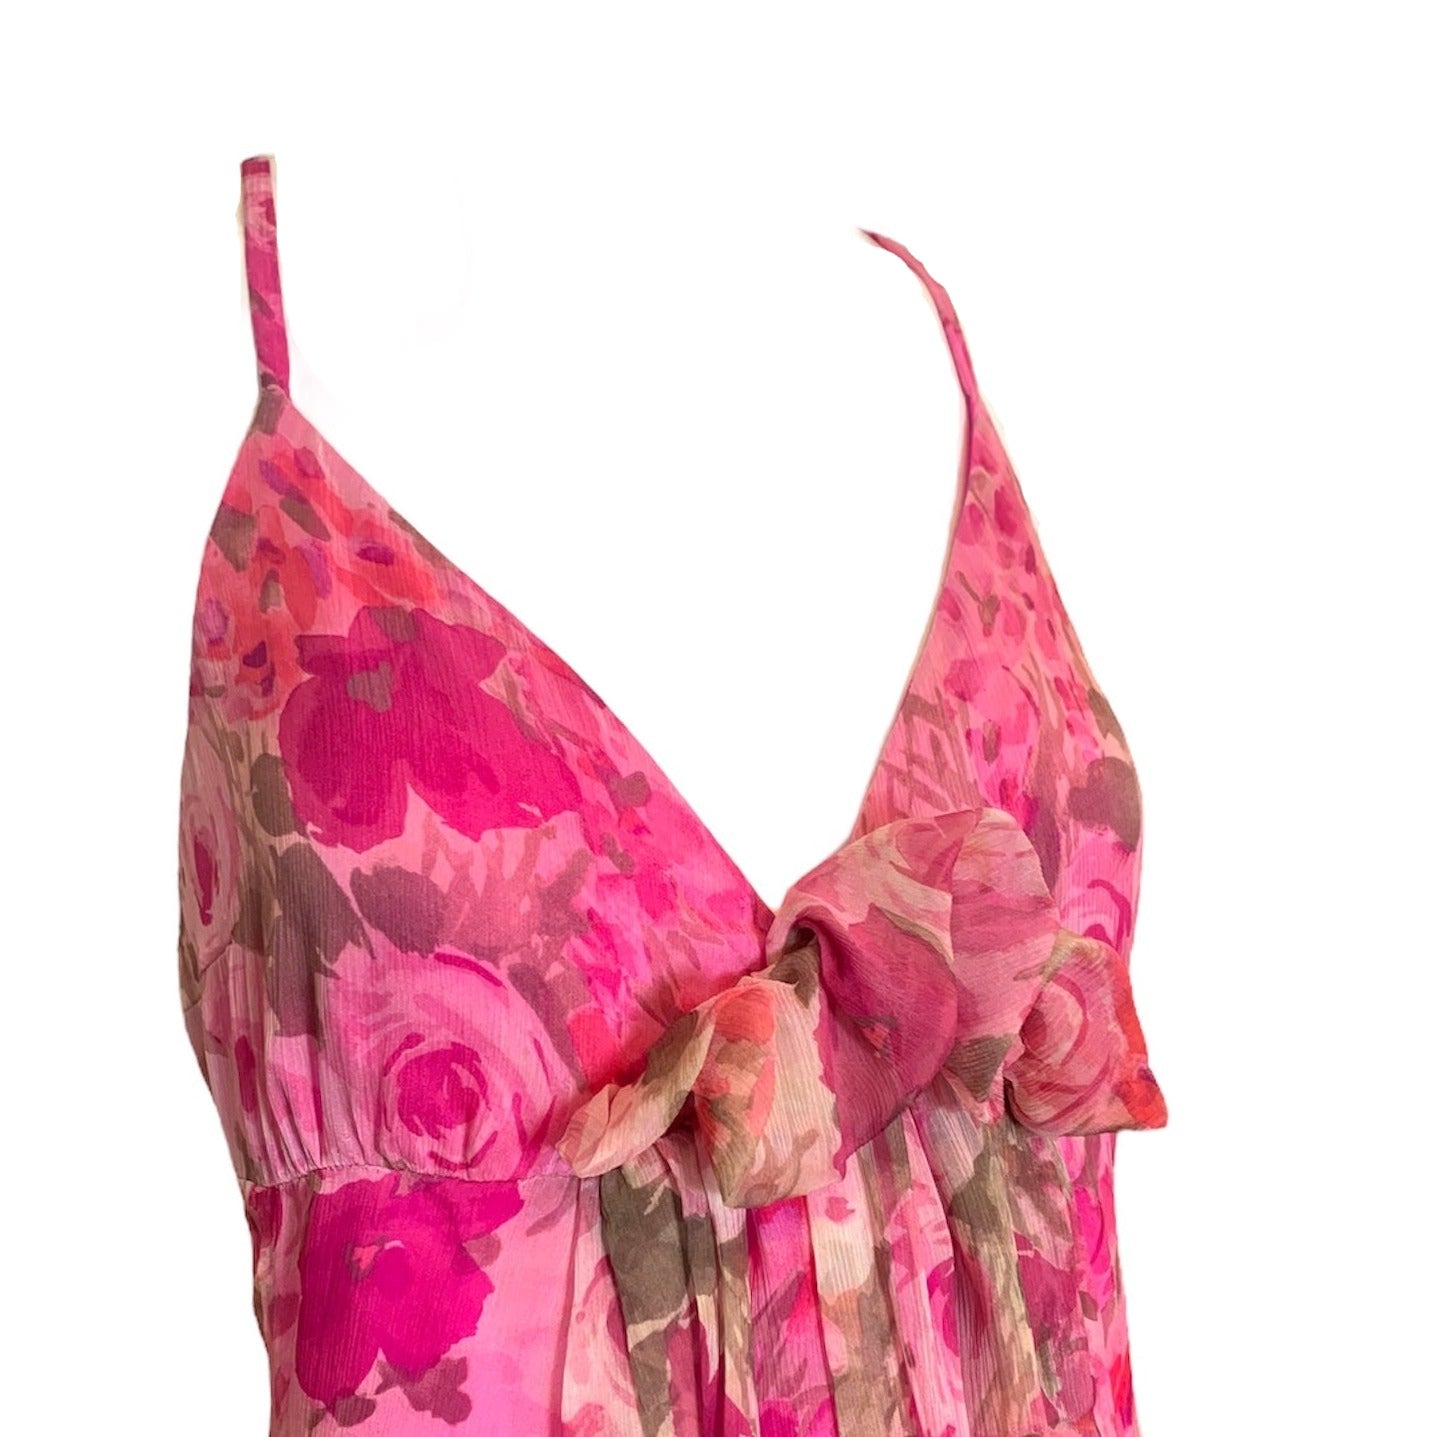   Valentino Tissus  Y2K Pink Chiffon Floral Babydoll Gown DETAIL 4 of 6